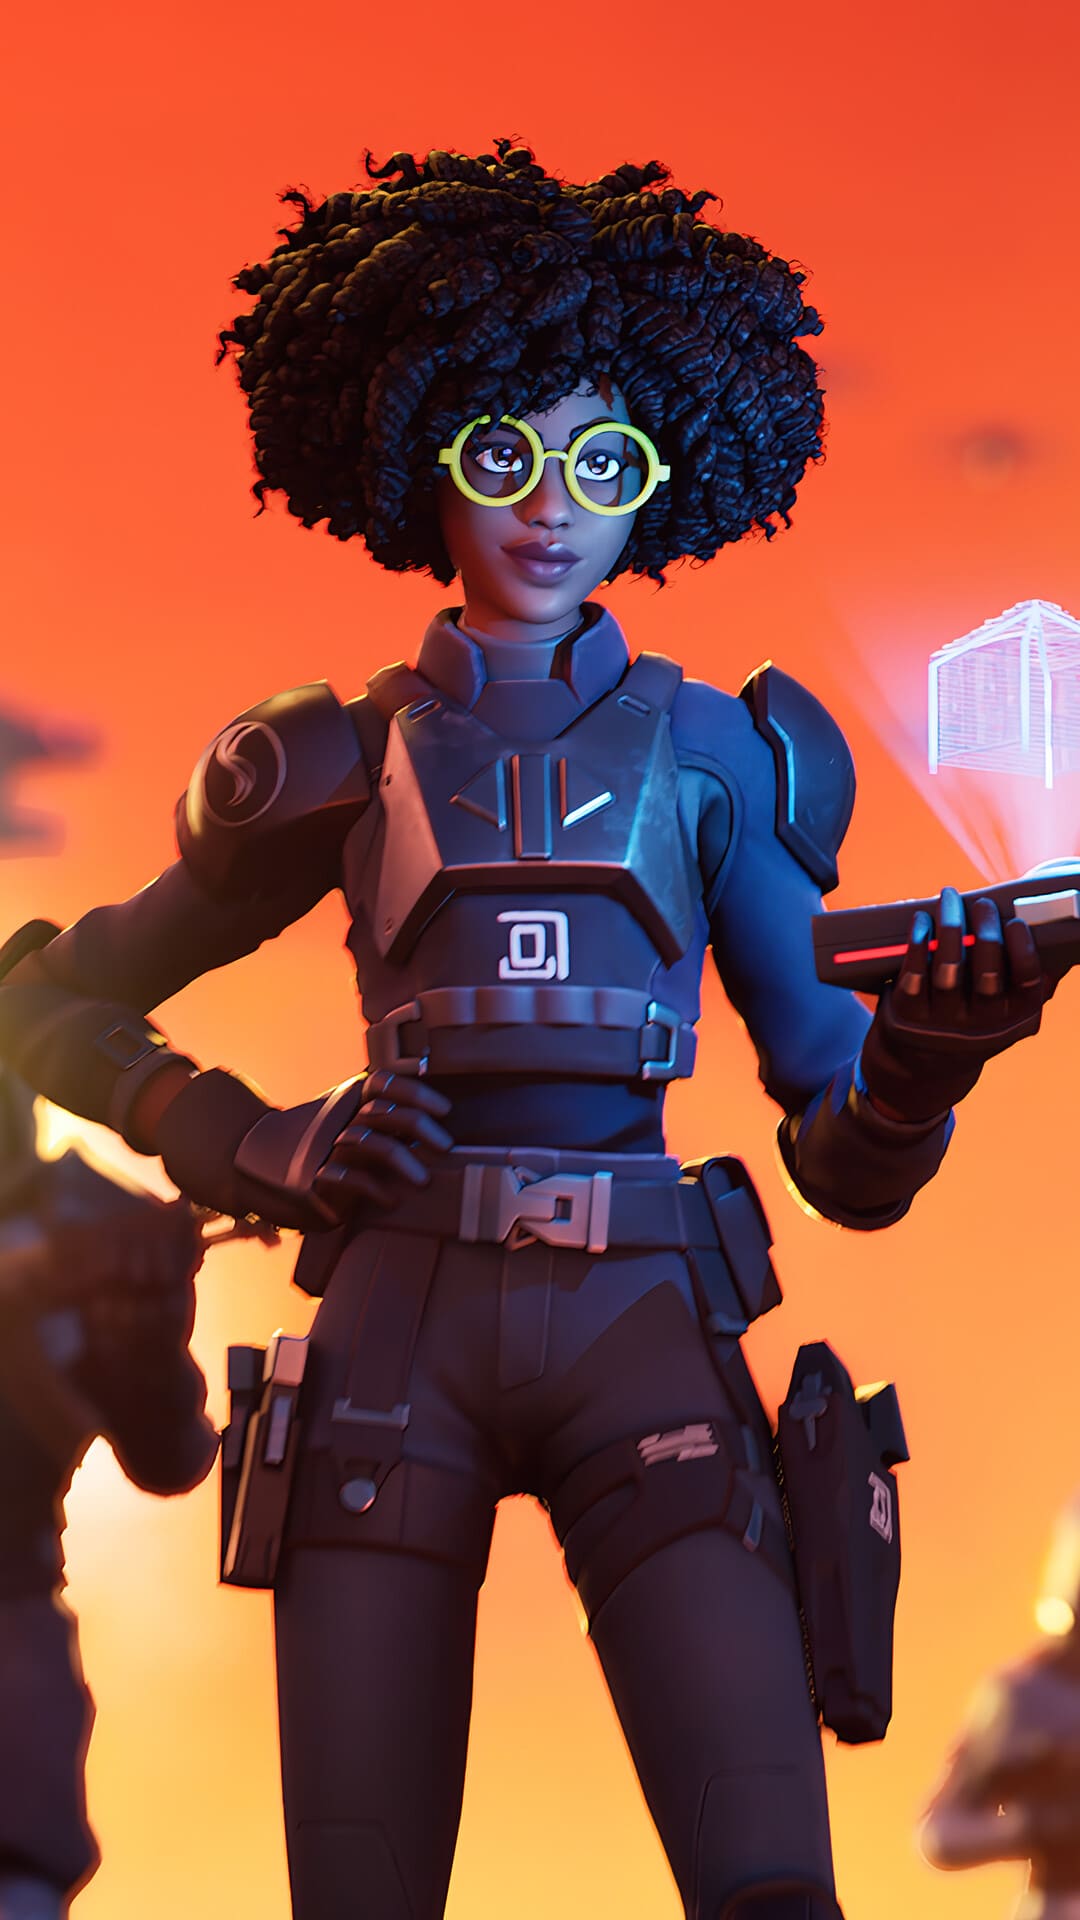 A character from Fortnite, an African American female wearing a blue helmet, yellow glasses, and a black blaster. - Fortnite